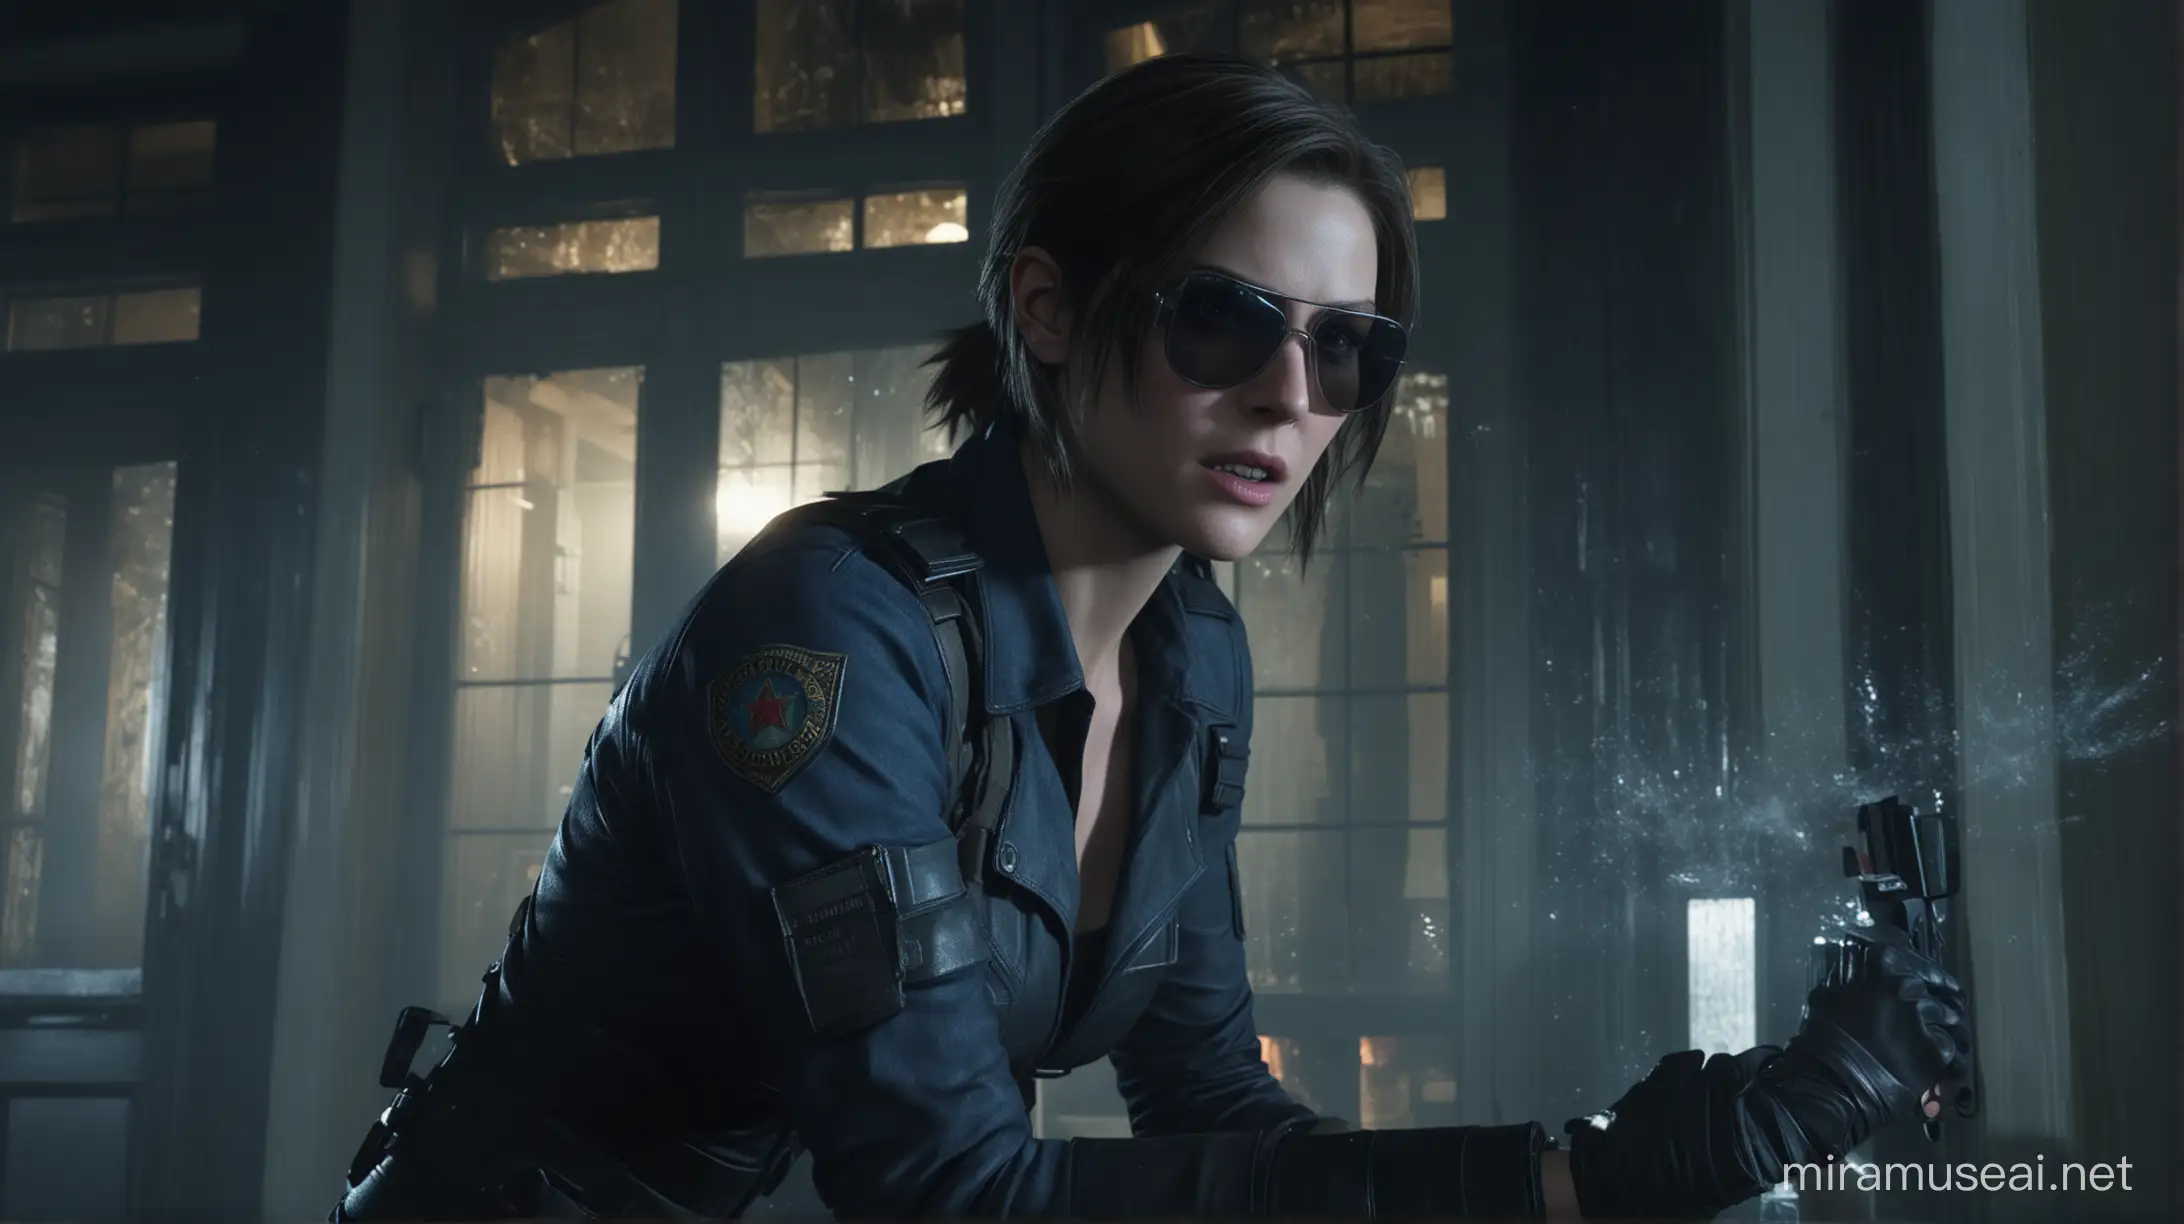 Resident Evil Jill Valentines daring escape with sunglasseswearing man through a shattered mansion window on a foggy night